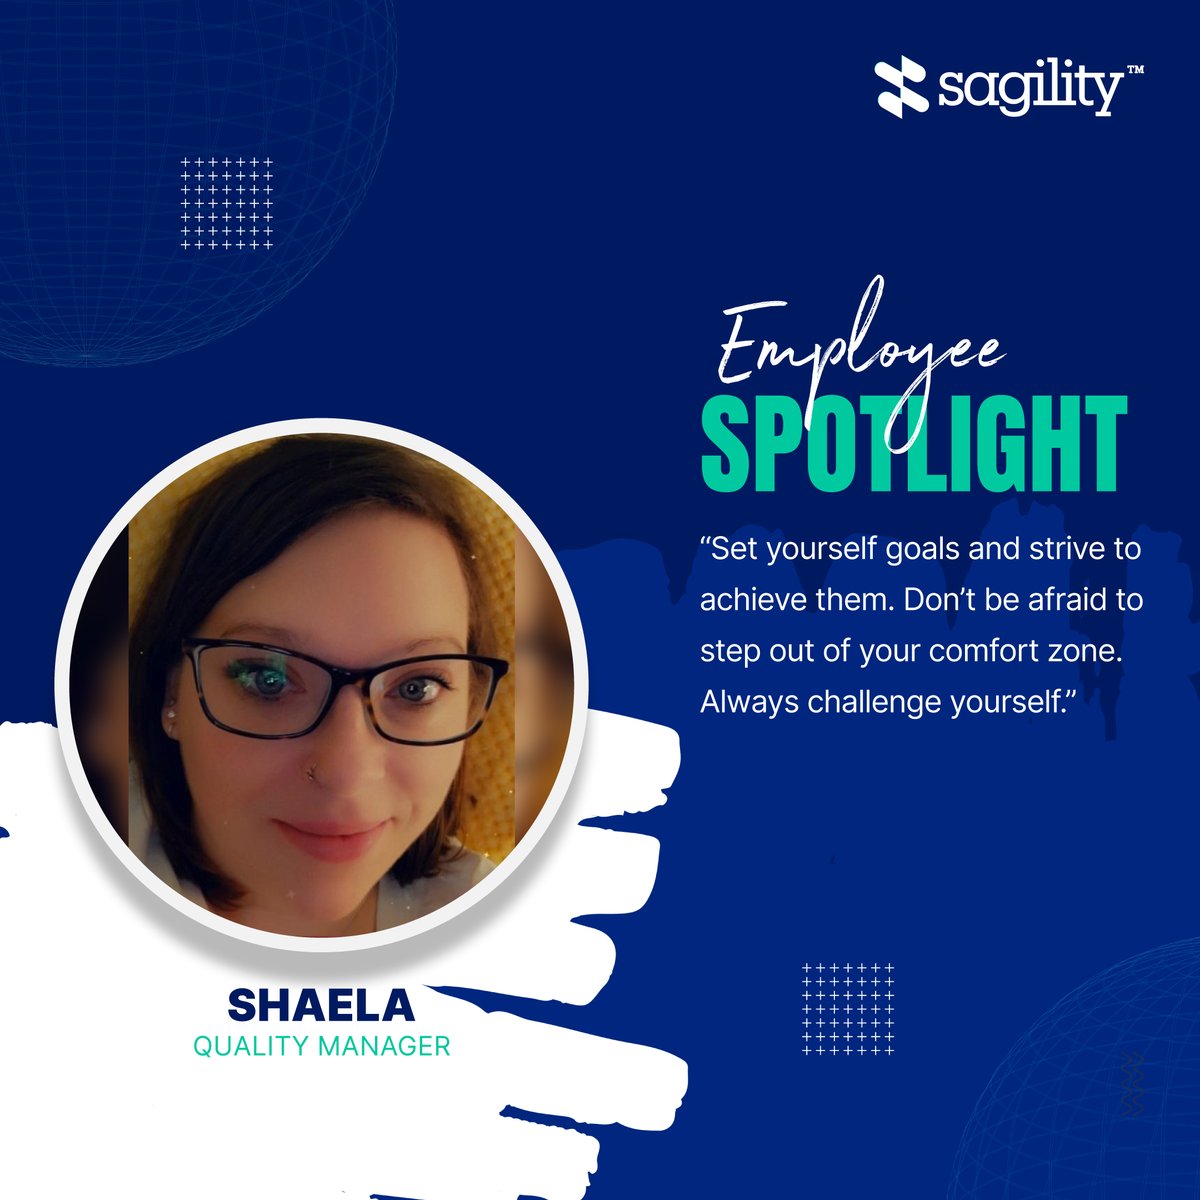 Meet Shaela, she embodies the essence of excellence and leadership within our organization. With a passion for setting and achieving goals, she advises new employees to embrace challenges and step out of their comfort zones.

#Sagility #EmployeeSpotlight #GrowWithSagility